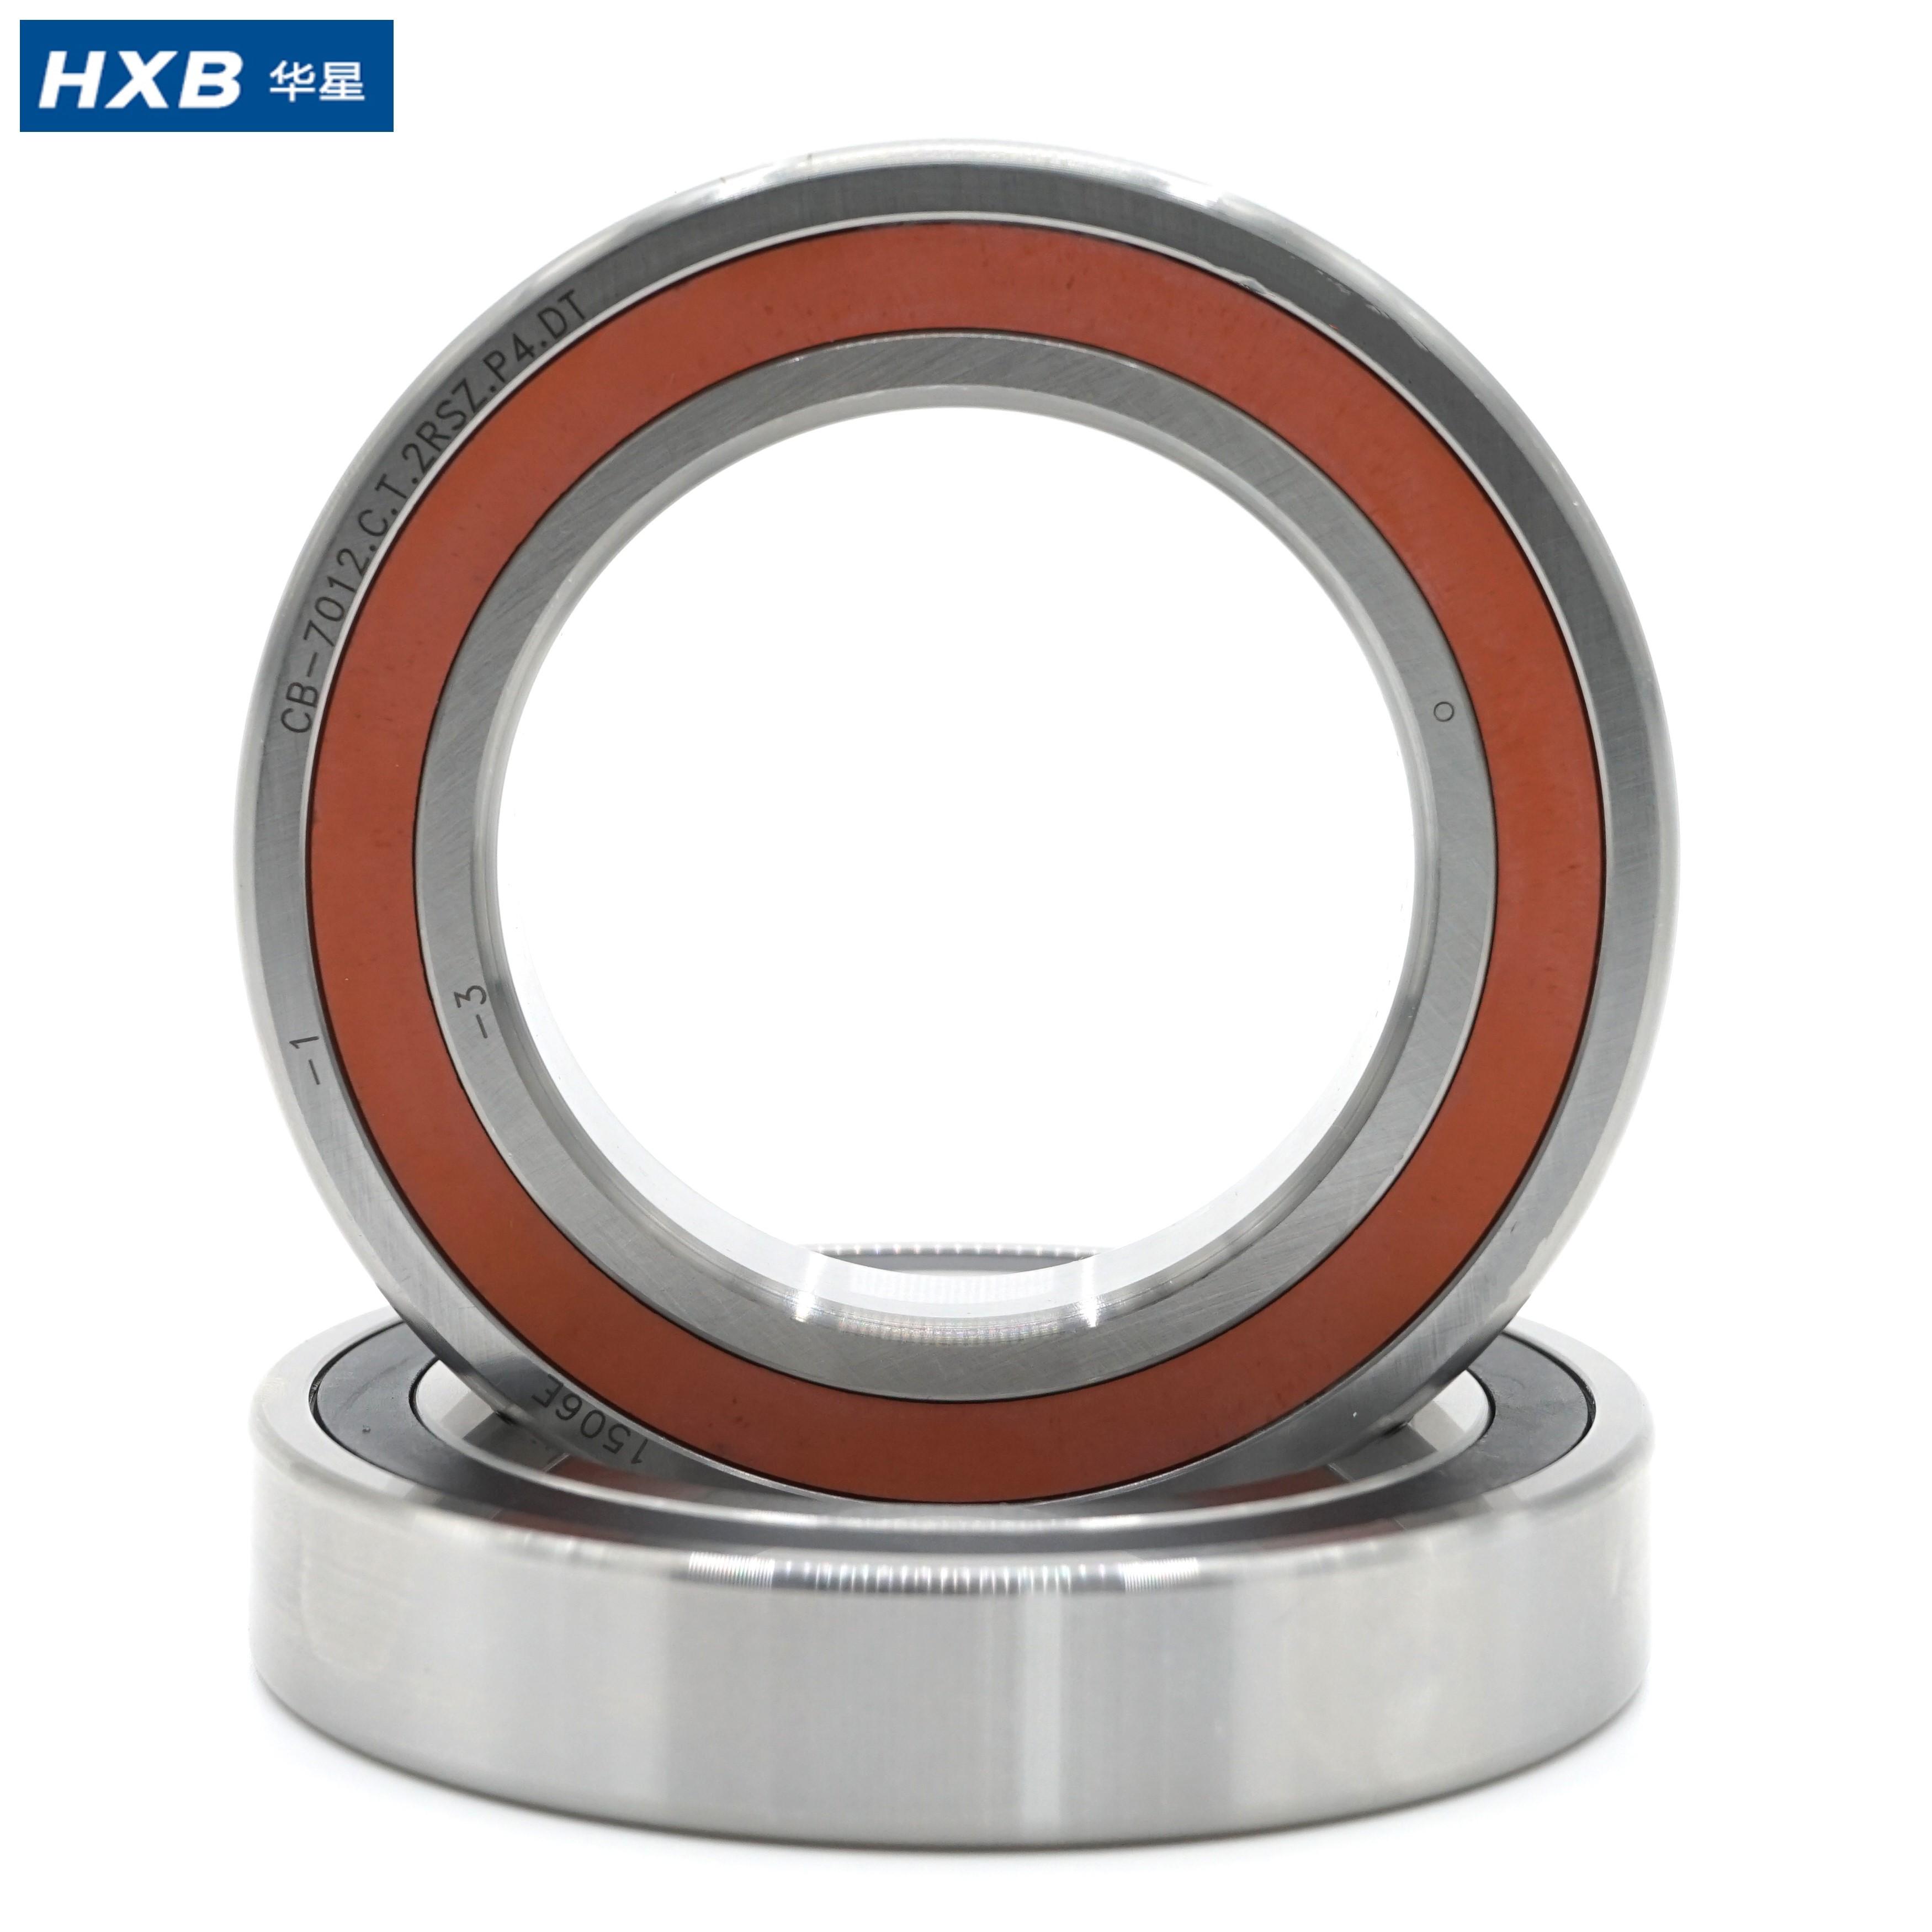 7000/7200/7300 series high precision sealed spindle bearing for CNC router spindle 